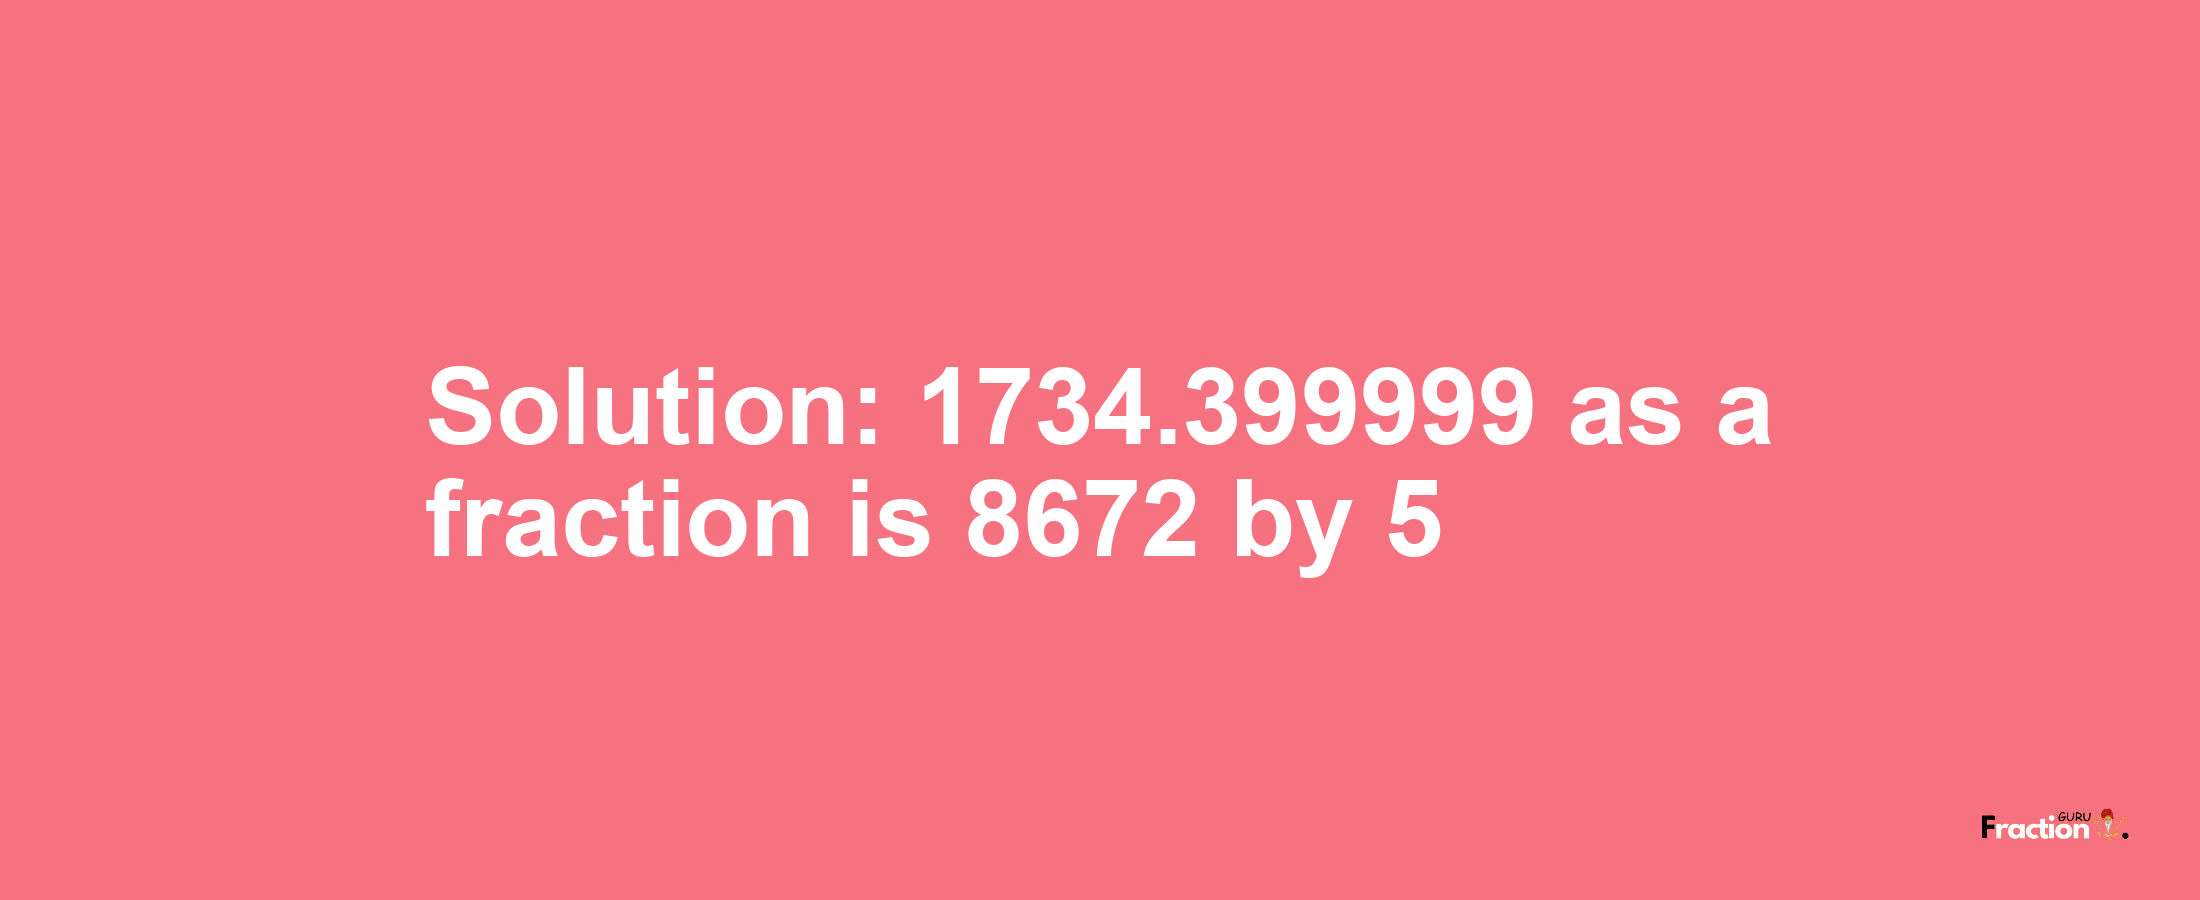 Solution:1734.399999 as a fraction is 8672/5